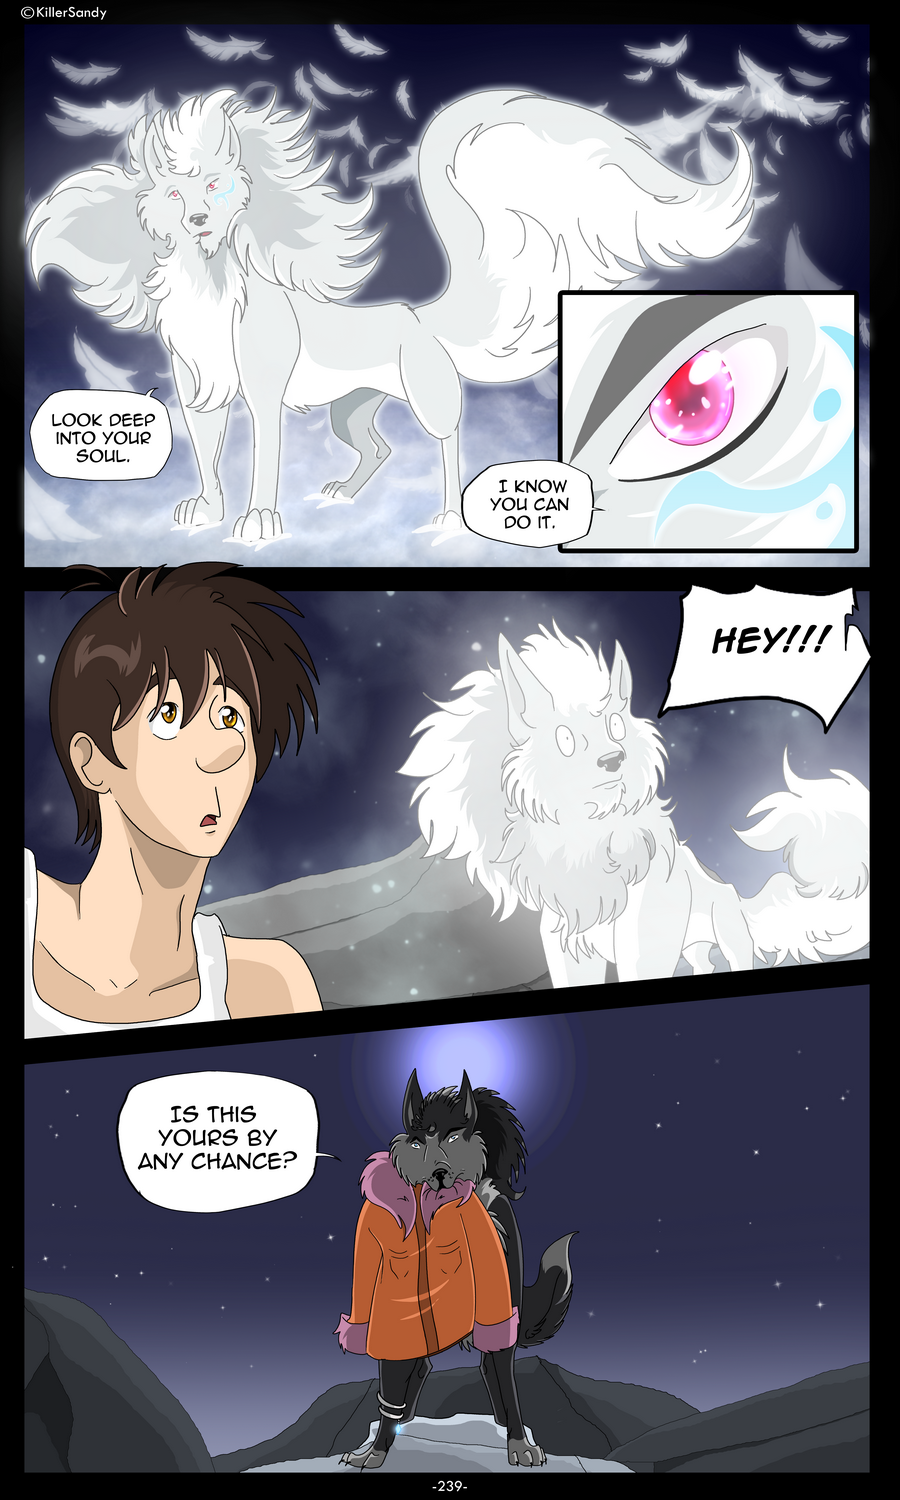 The Prince of the Moonlight Stone page 239